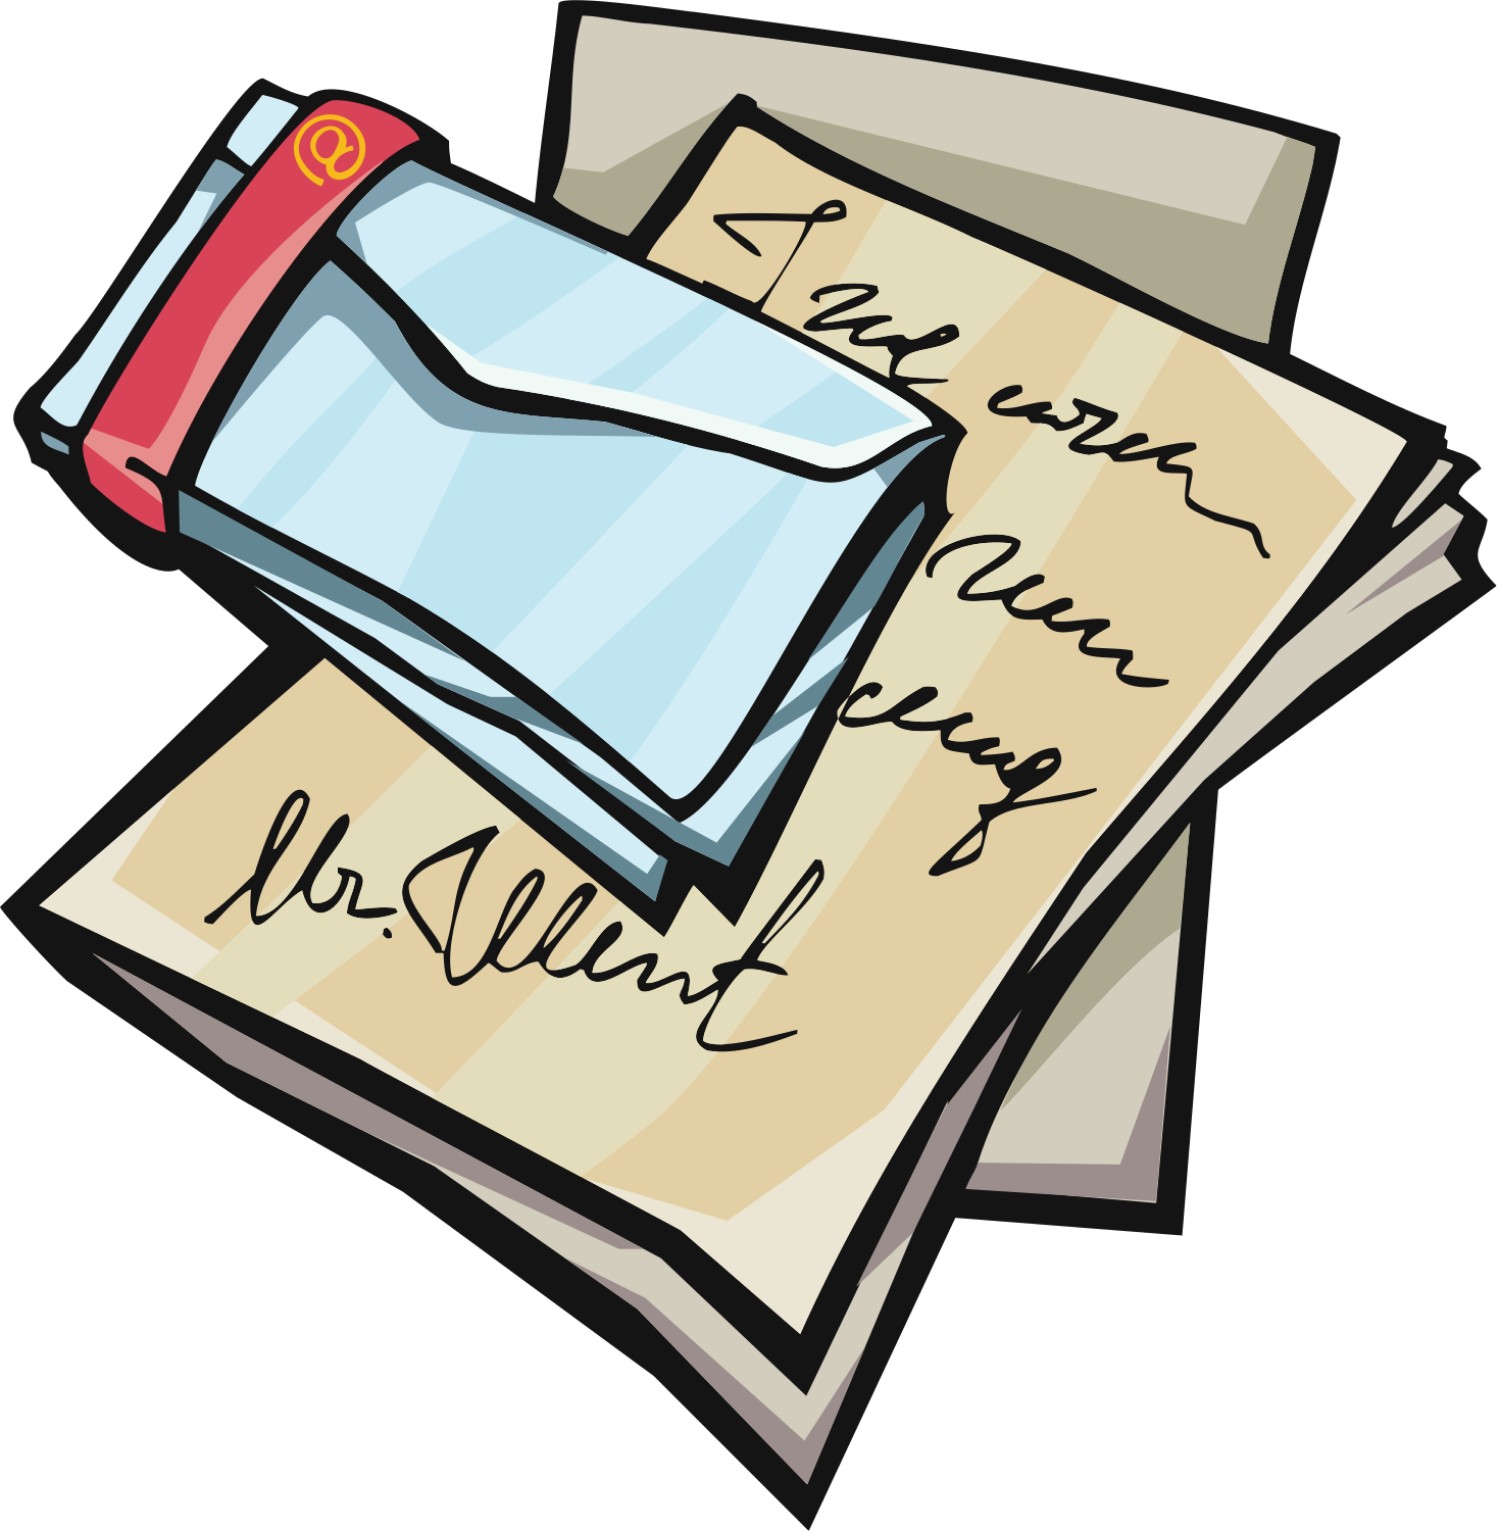 Writing A Letter Clipart Best